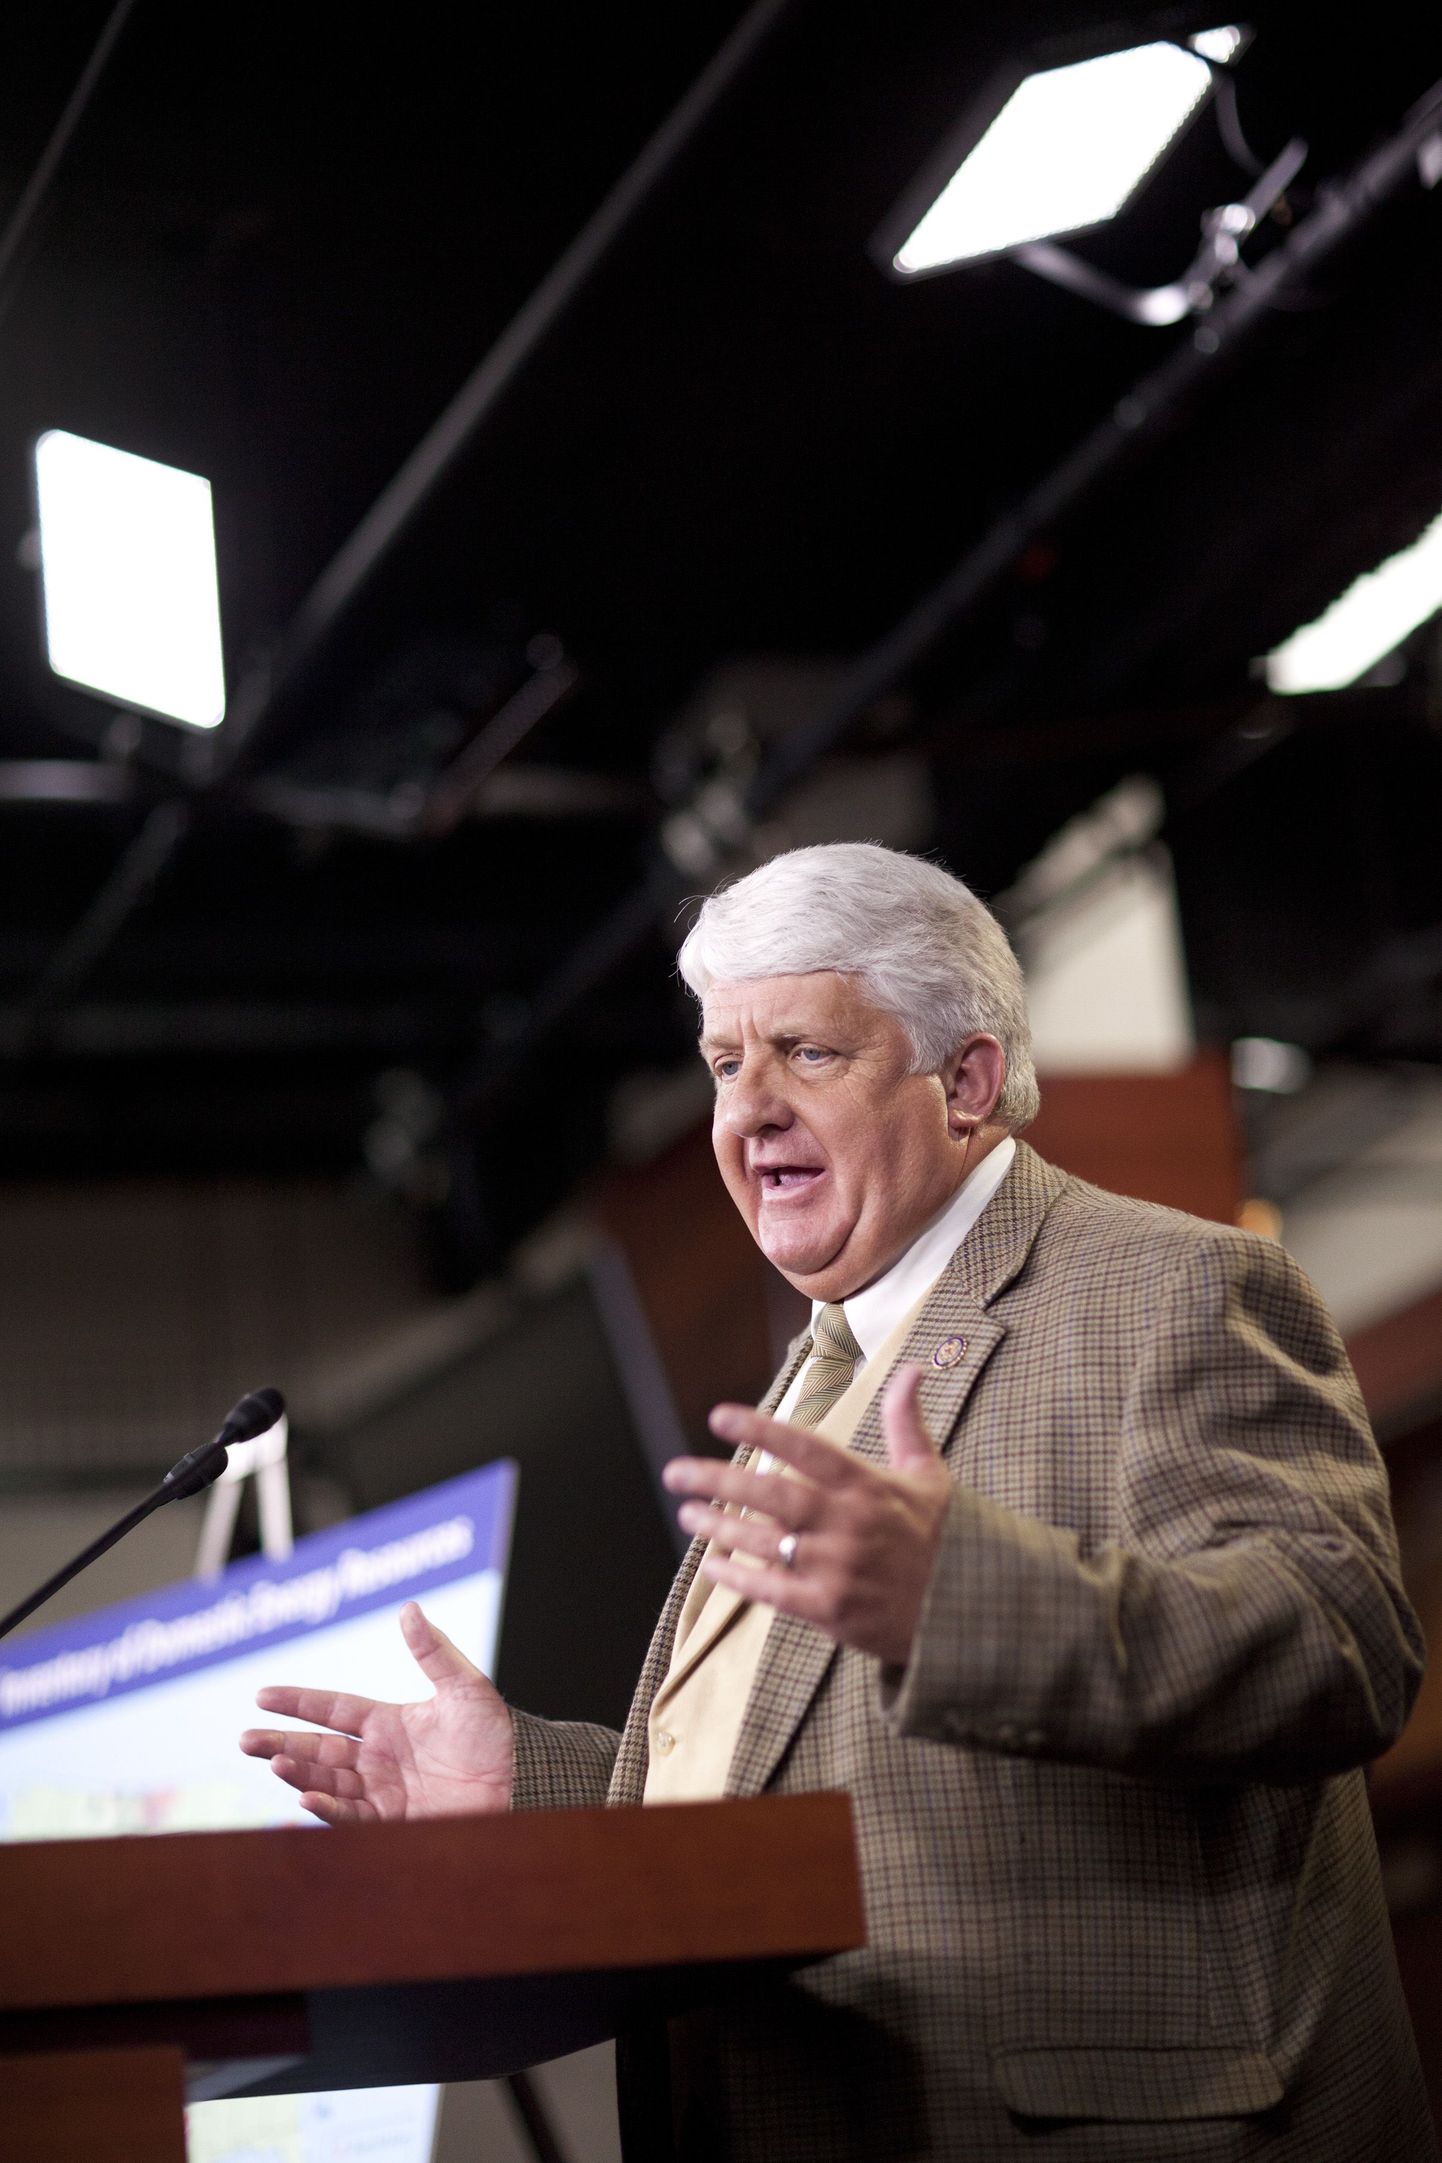 Rep. Rob Bishop (R-Utah) speaks at a press conference on Capitol Hill in Washington, on May 5, 2011. Bishop introduced legislation to reduce gas prices with a group of Republican Congressmen. (Philip Scott Andrews/The New York Times)